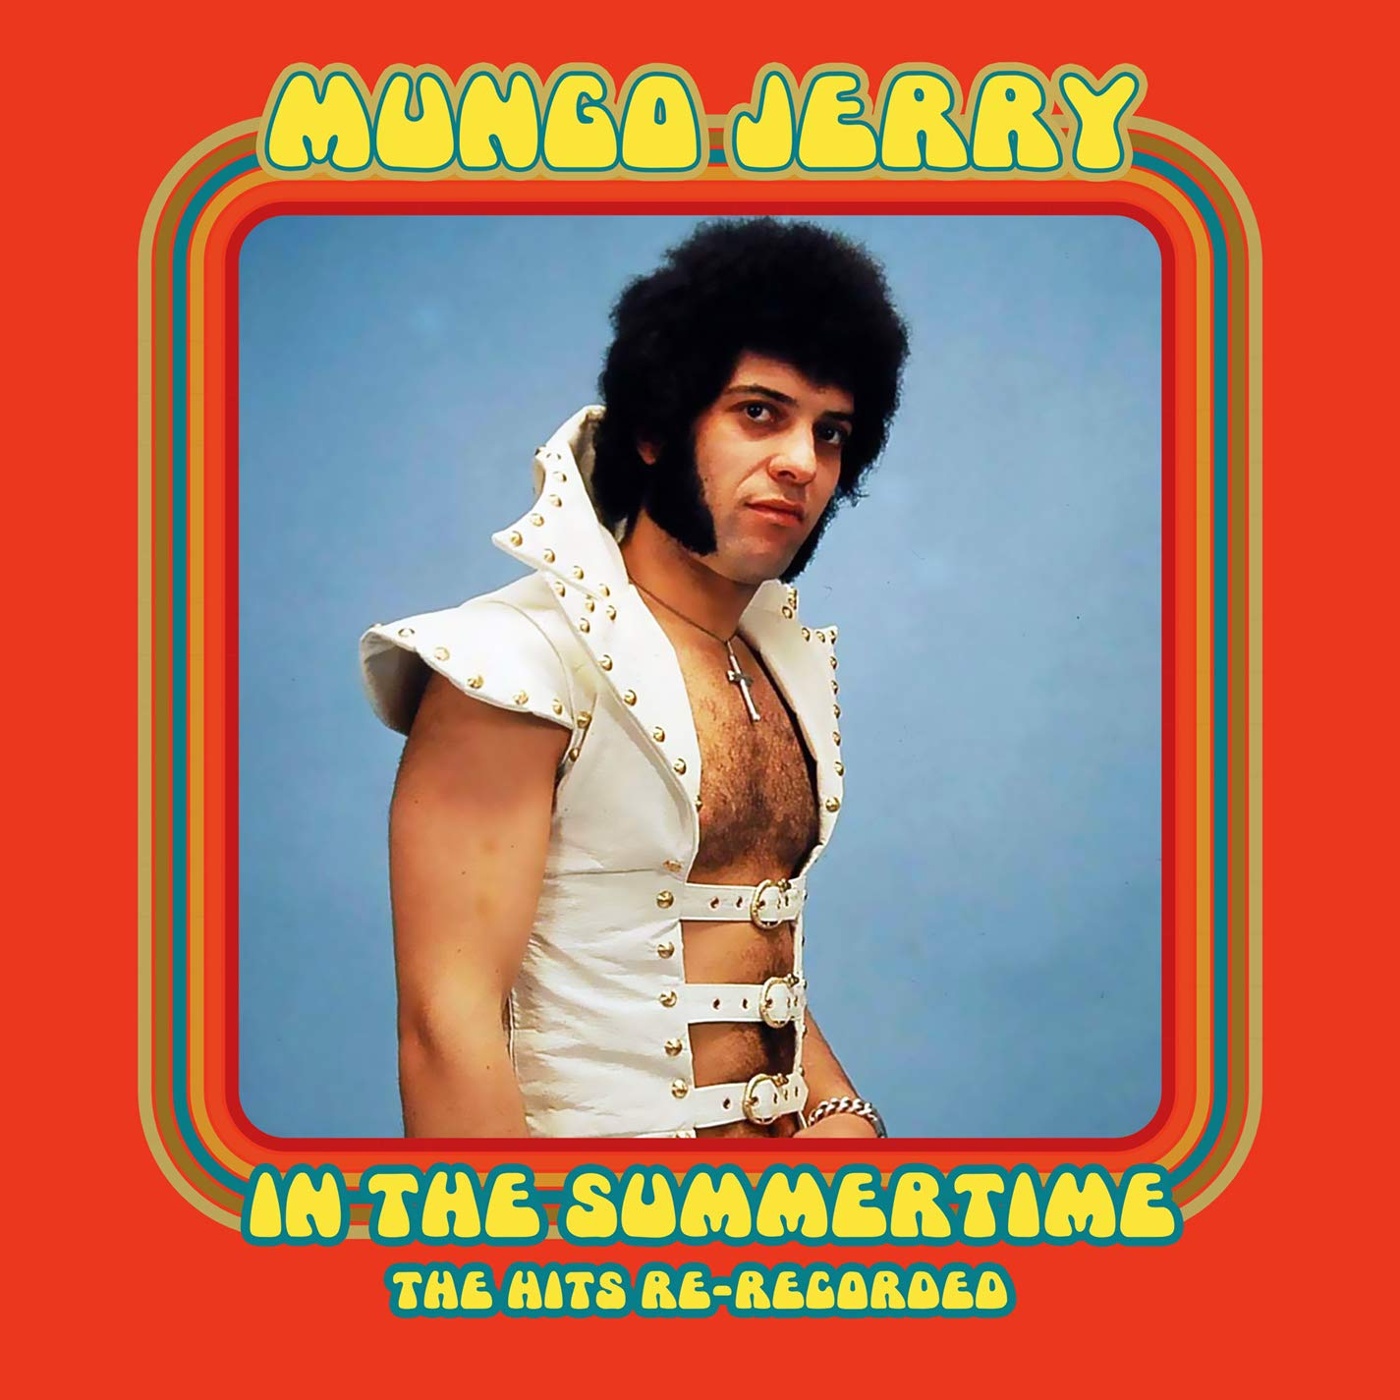 Mungo jerry in the summertime. Mungo Jerry Lady Rose. Группа Mungo Jerry треки. Mungo Jerry in the Winter time.